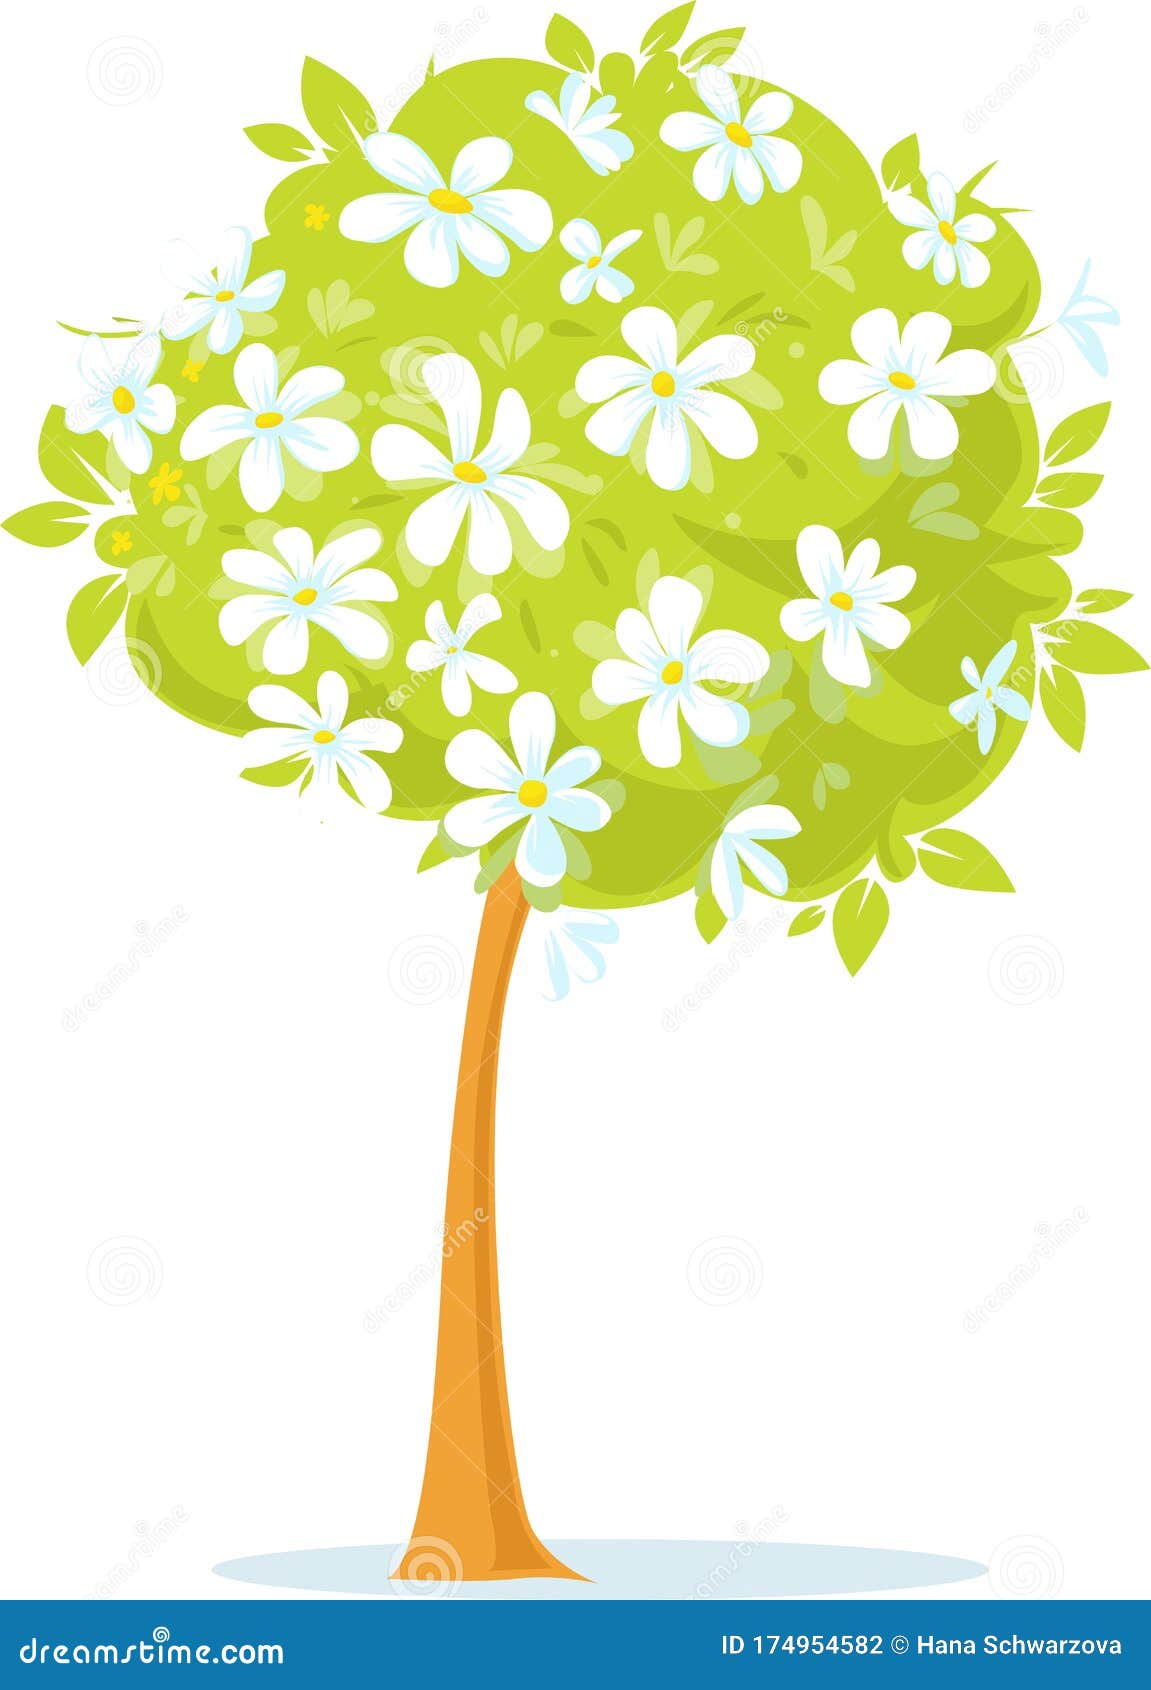 Spring White Flower Tree Or Blooming Apple Tree Vector Stock Vector Illustration Of Vector Decorative 174954582